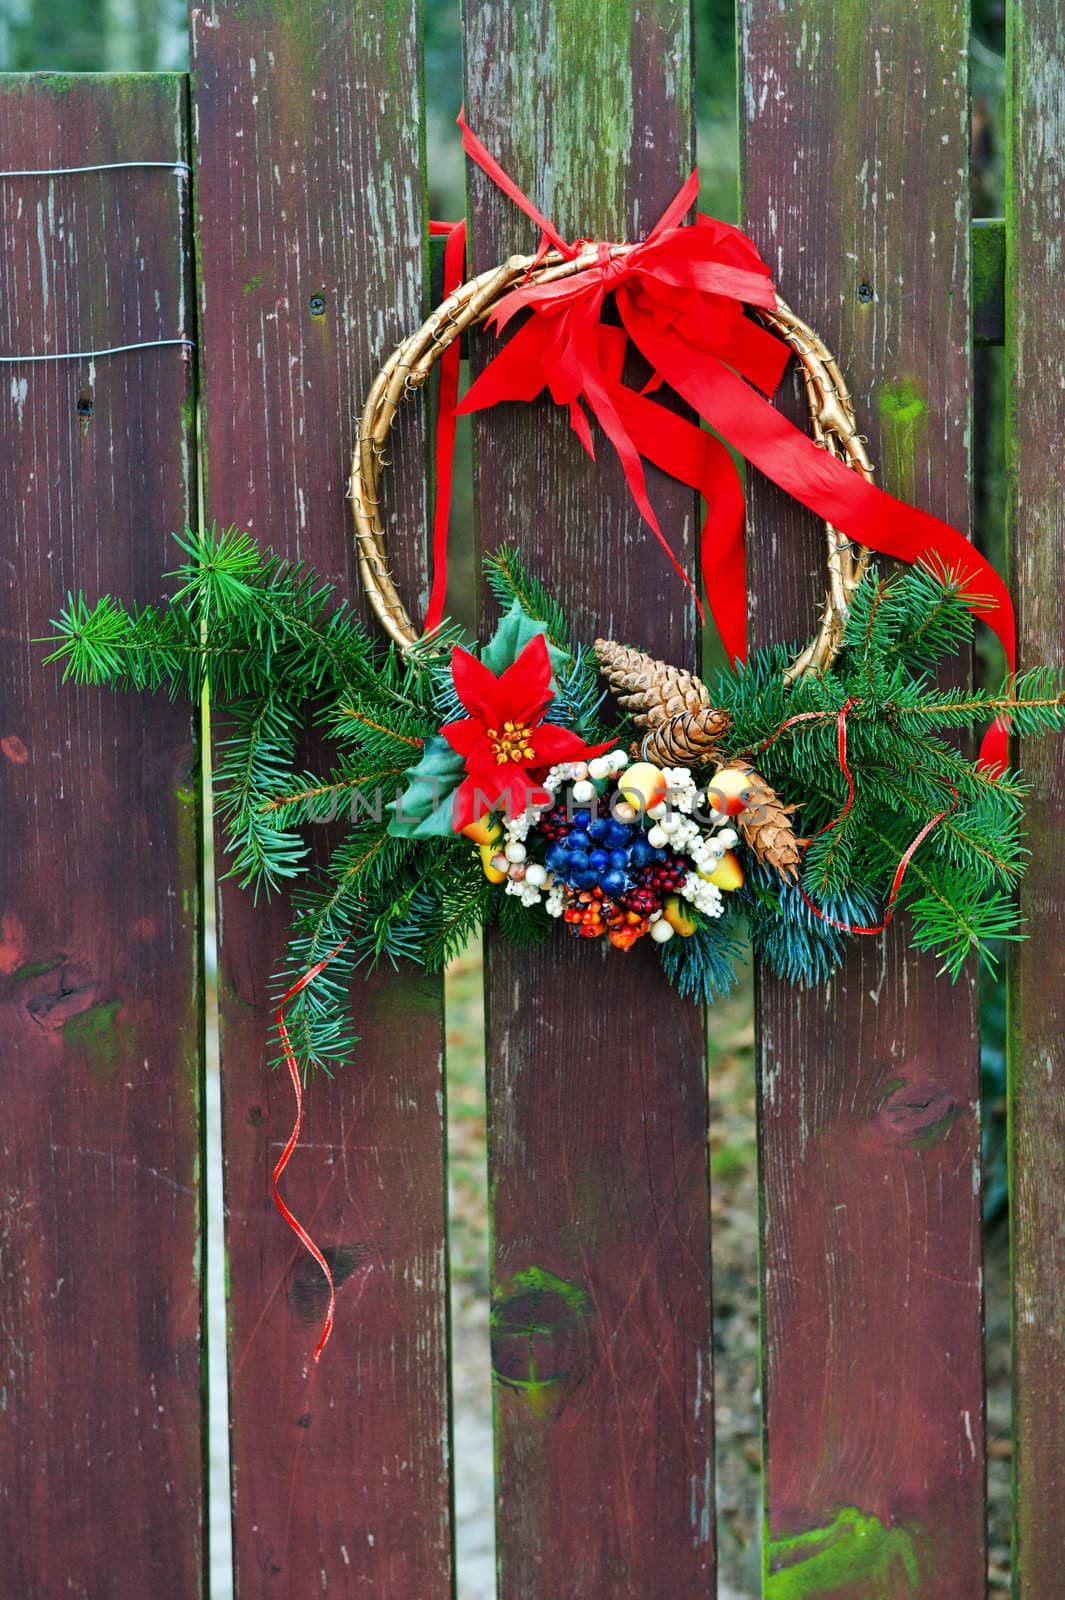 Christmas ornament on a wooden gate to village